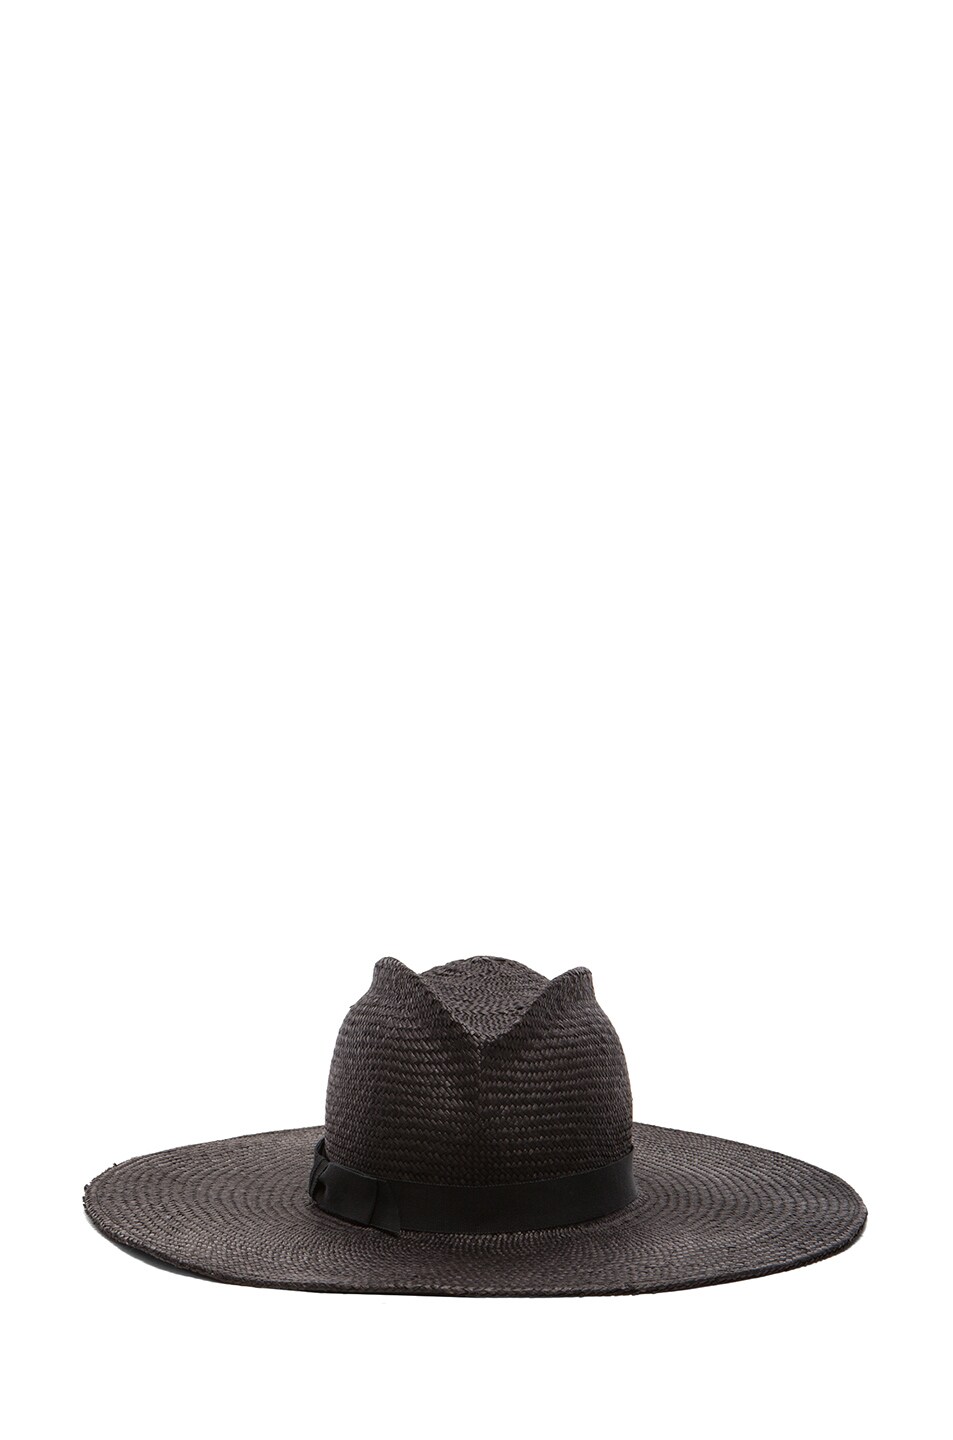 Image 1 of Gladys Tamez Millinery The Bianca Hat in Black